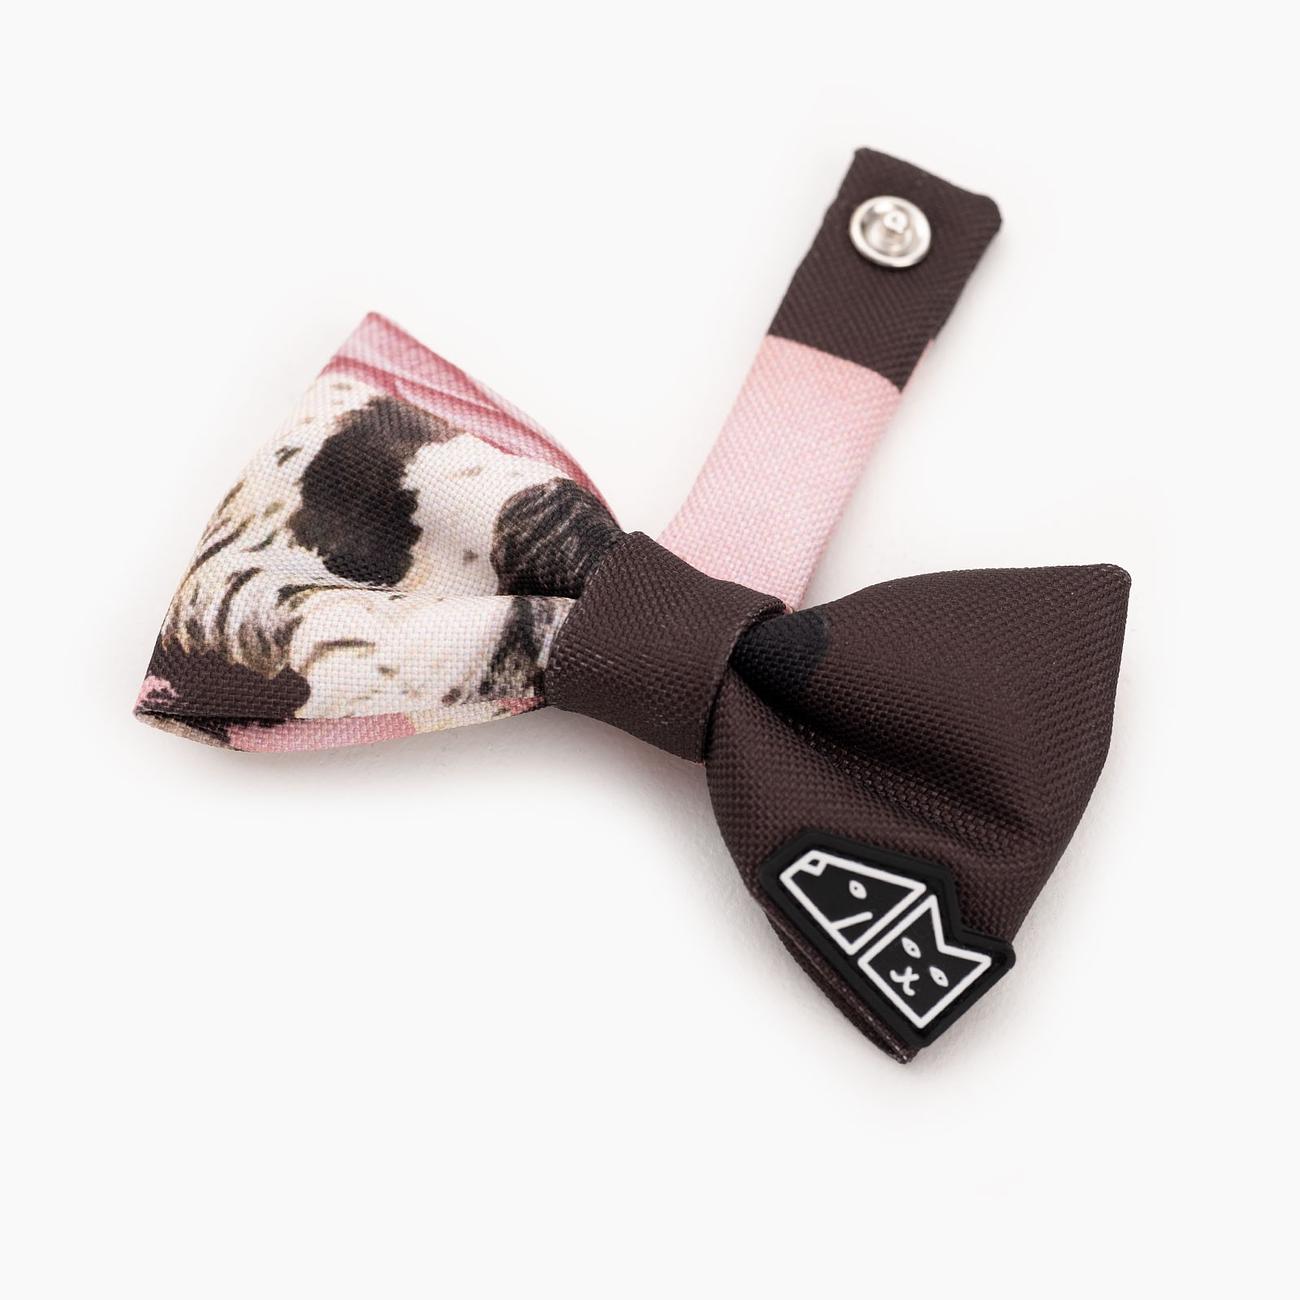 Bow tie "Too sweet to handle" 